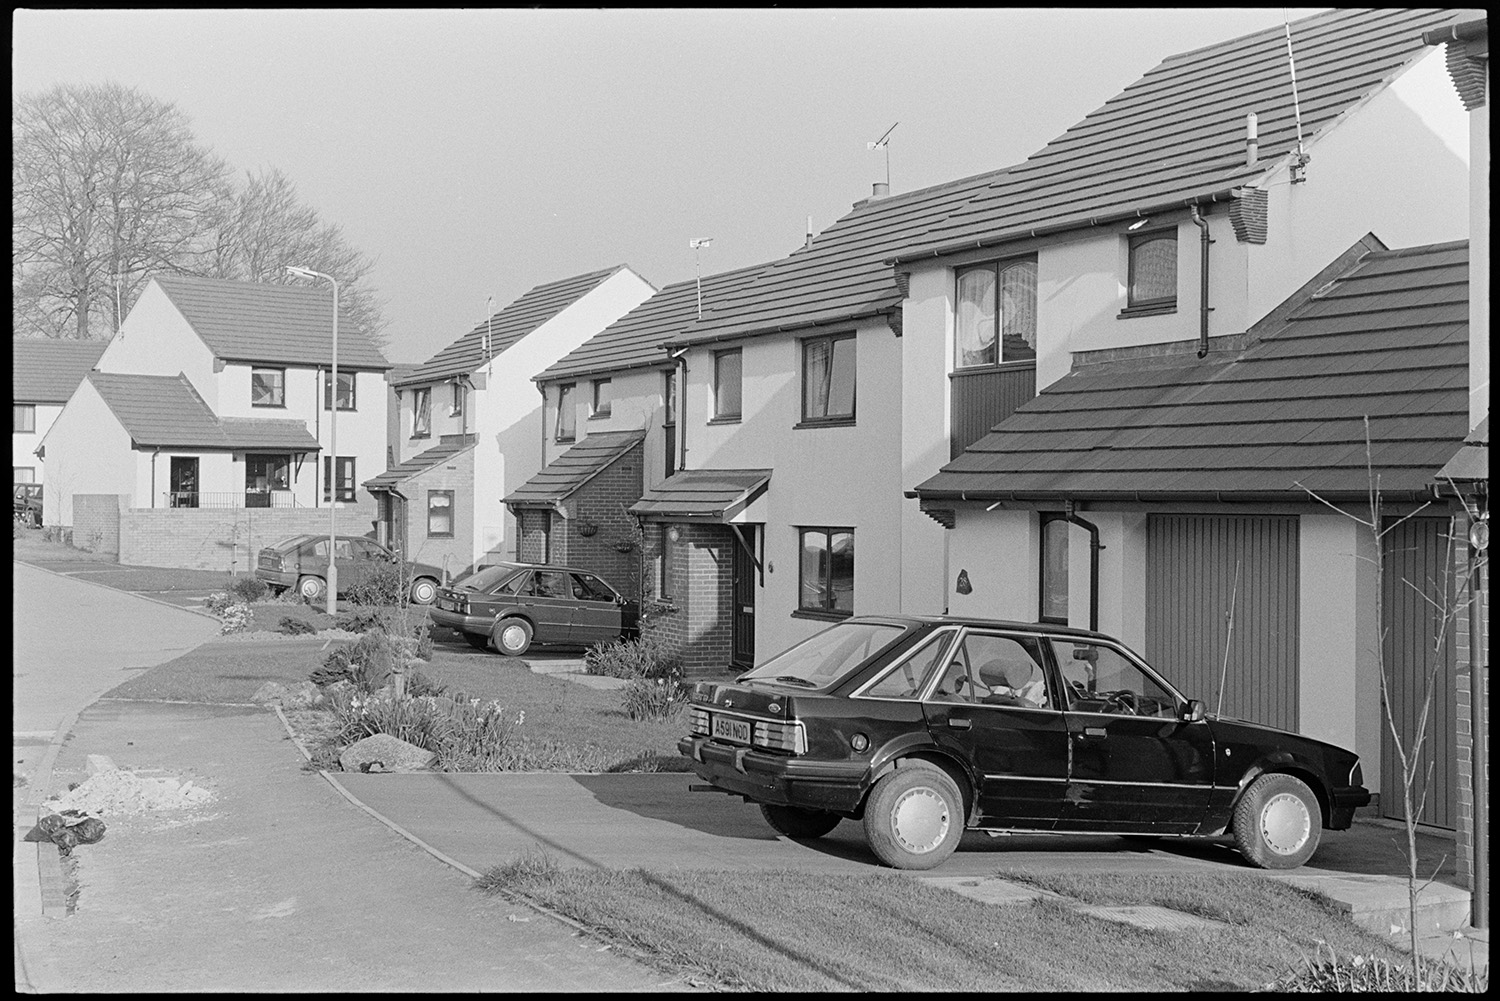 New housing estate. 
[A new housing estate in South Molton. Detached and semi-detached houses are visible. Some have cars parked on the driveways.]